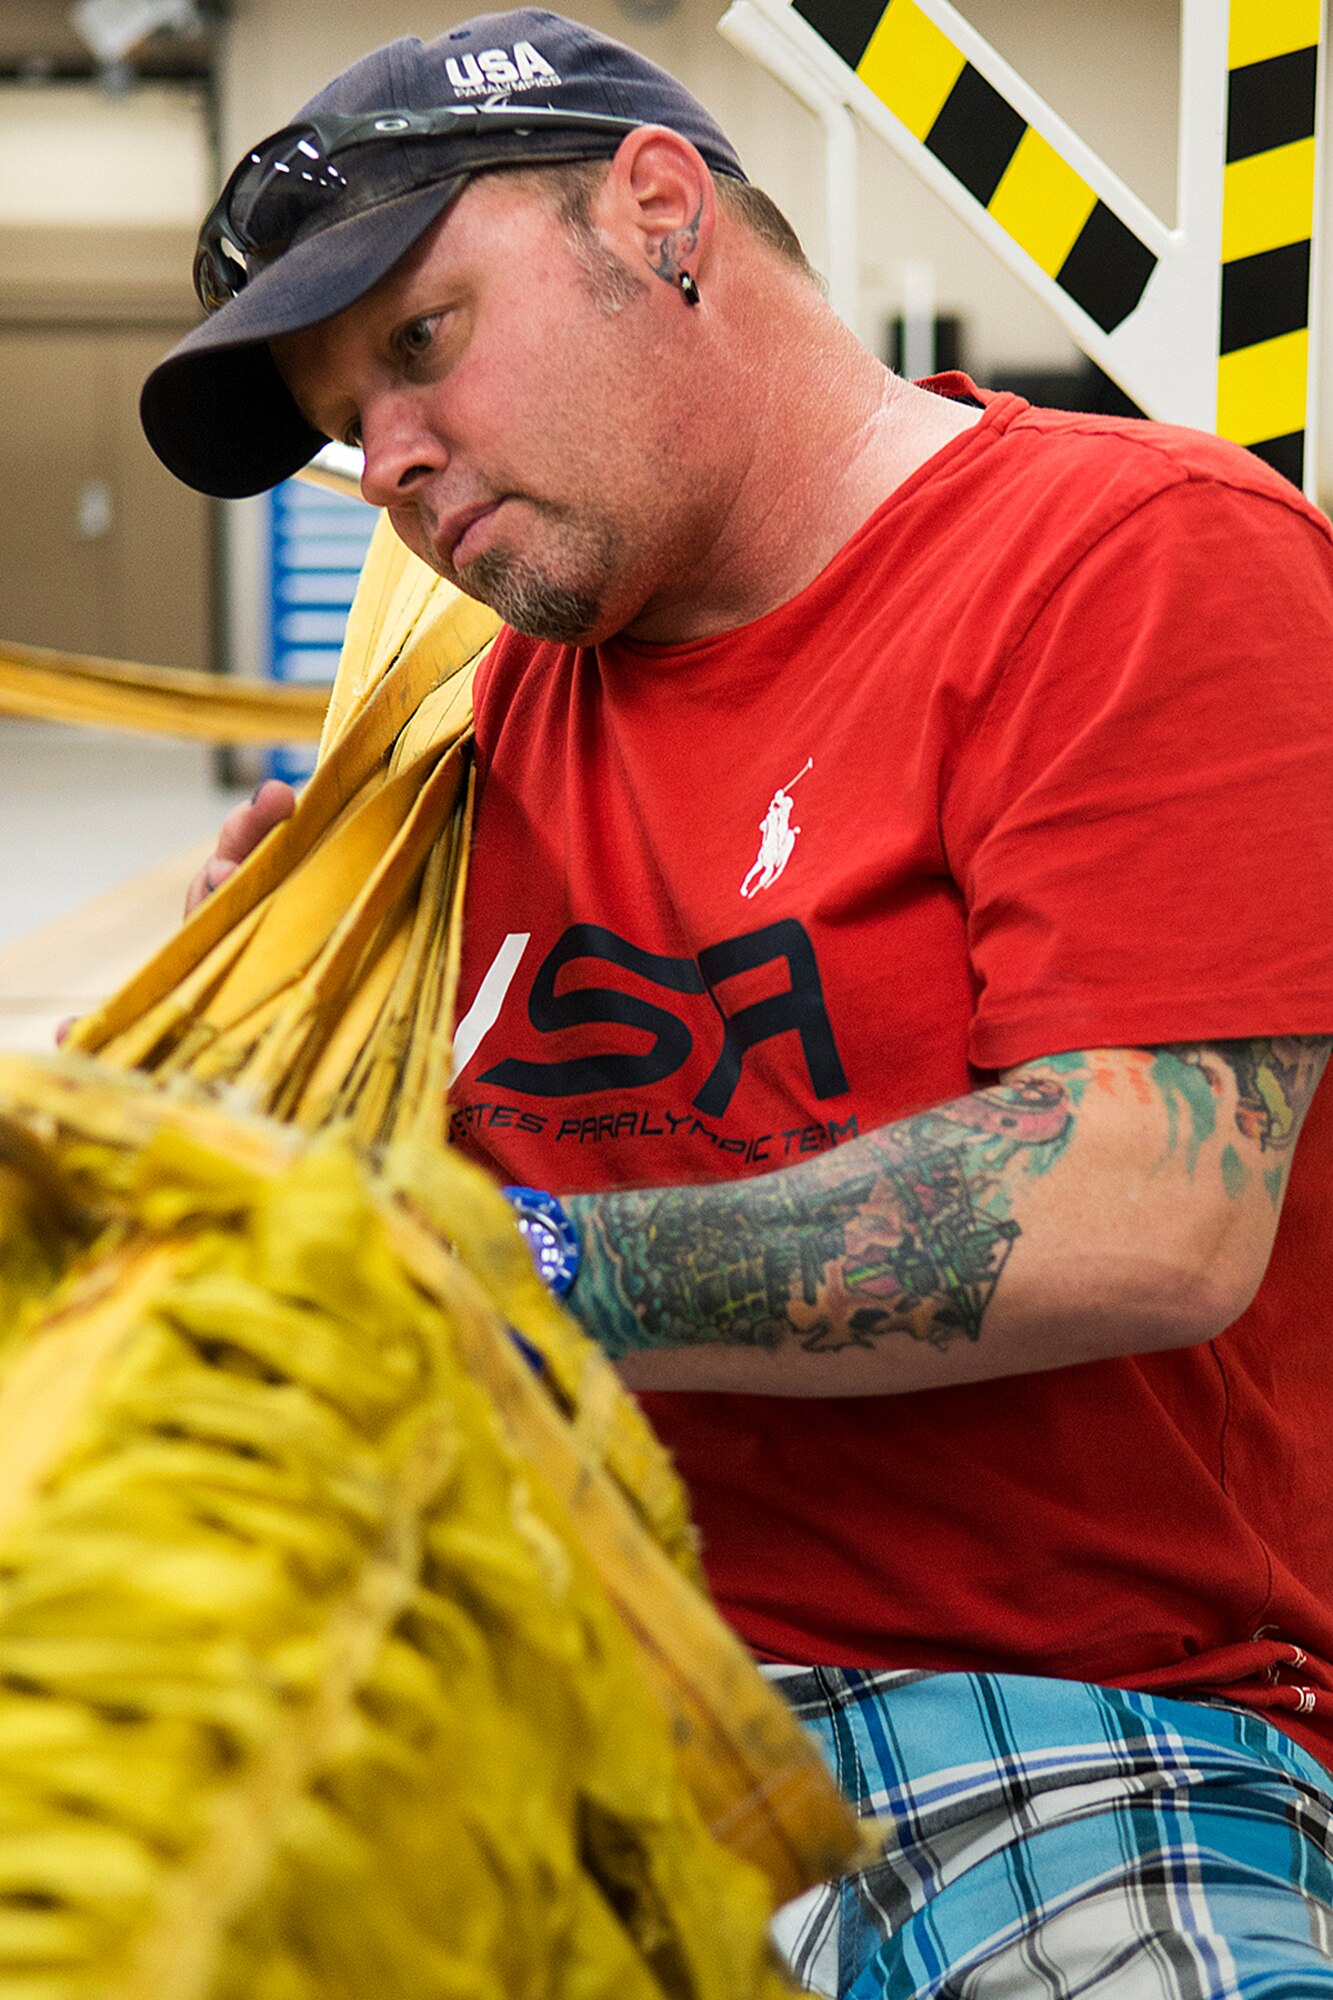 Patrick McDonald, U.S. Paralympic Curling Team captain, helps repack a B-52H Stratofortress drag chute during a tour of the 307th Operations Support Flight aircrew flight equipment shot, June 4, 2014, Barksdale Air Force Base, La. McDonald is part of the American300 Tours, which visits military installations with the goal of increasing resiliency of the troops, their families, and the communities that they live and operate in. (U.S. Air Force photo by Master Sgt. Greg Steele/Released)